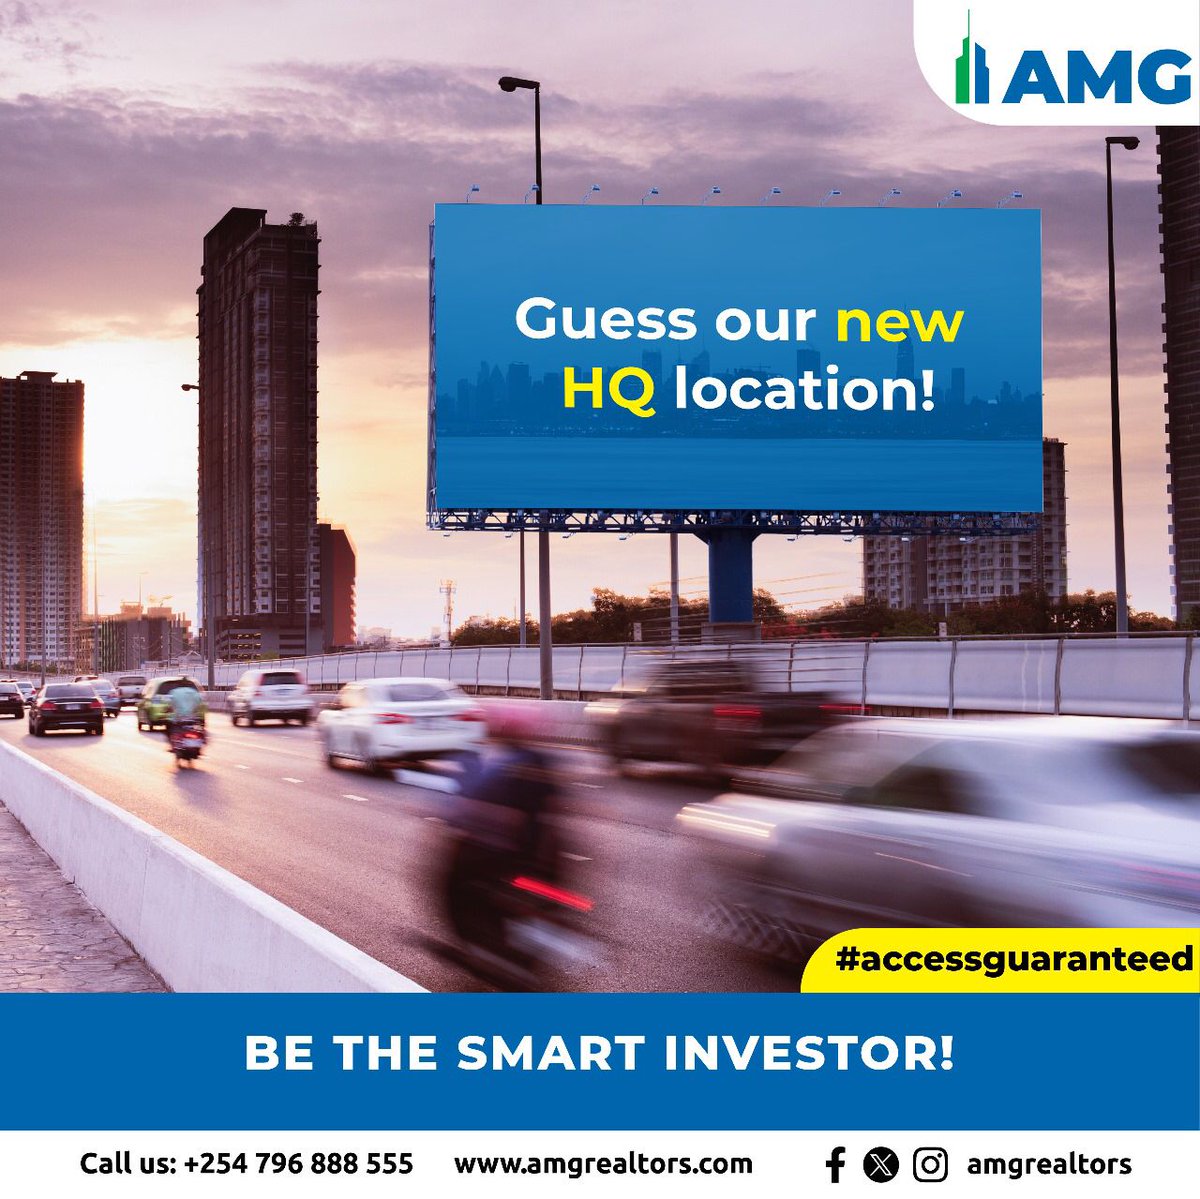 AMG Realtors is about to unveil their state-of-the-art international headquarters.

It's shaping up to be a game-changer in the real estate industry.
#AccessGuaranteed